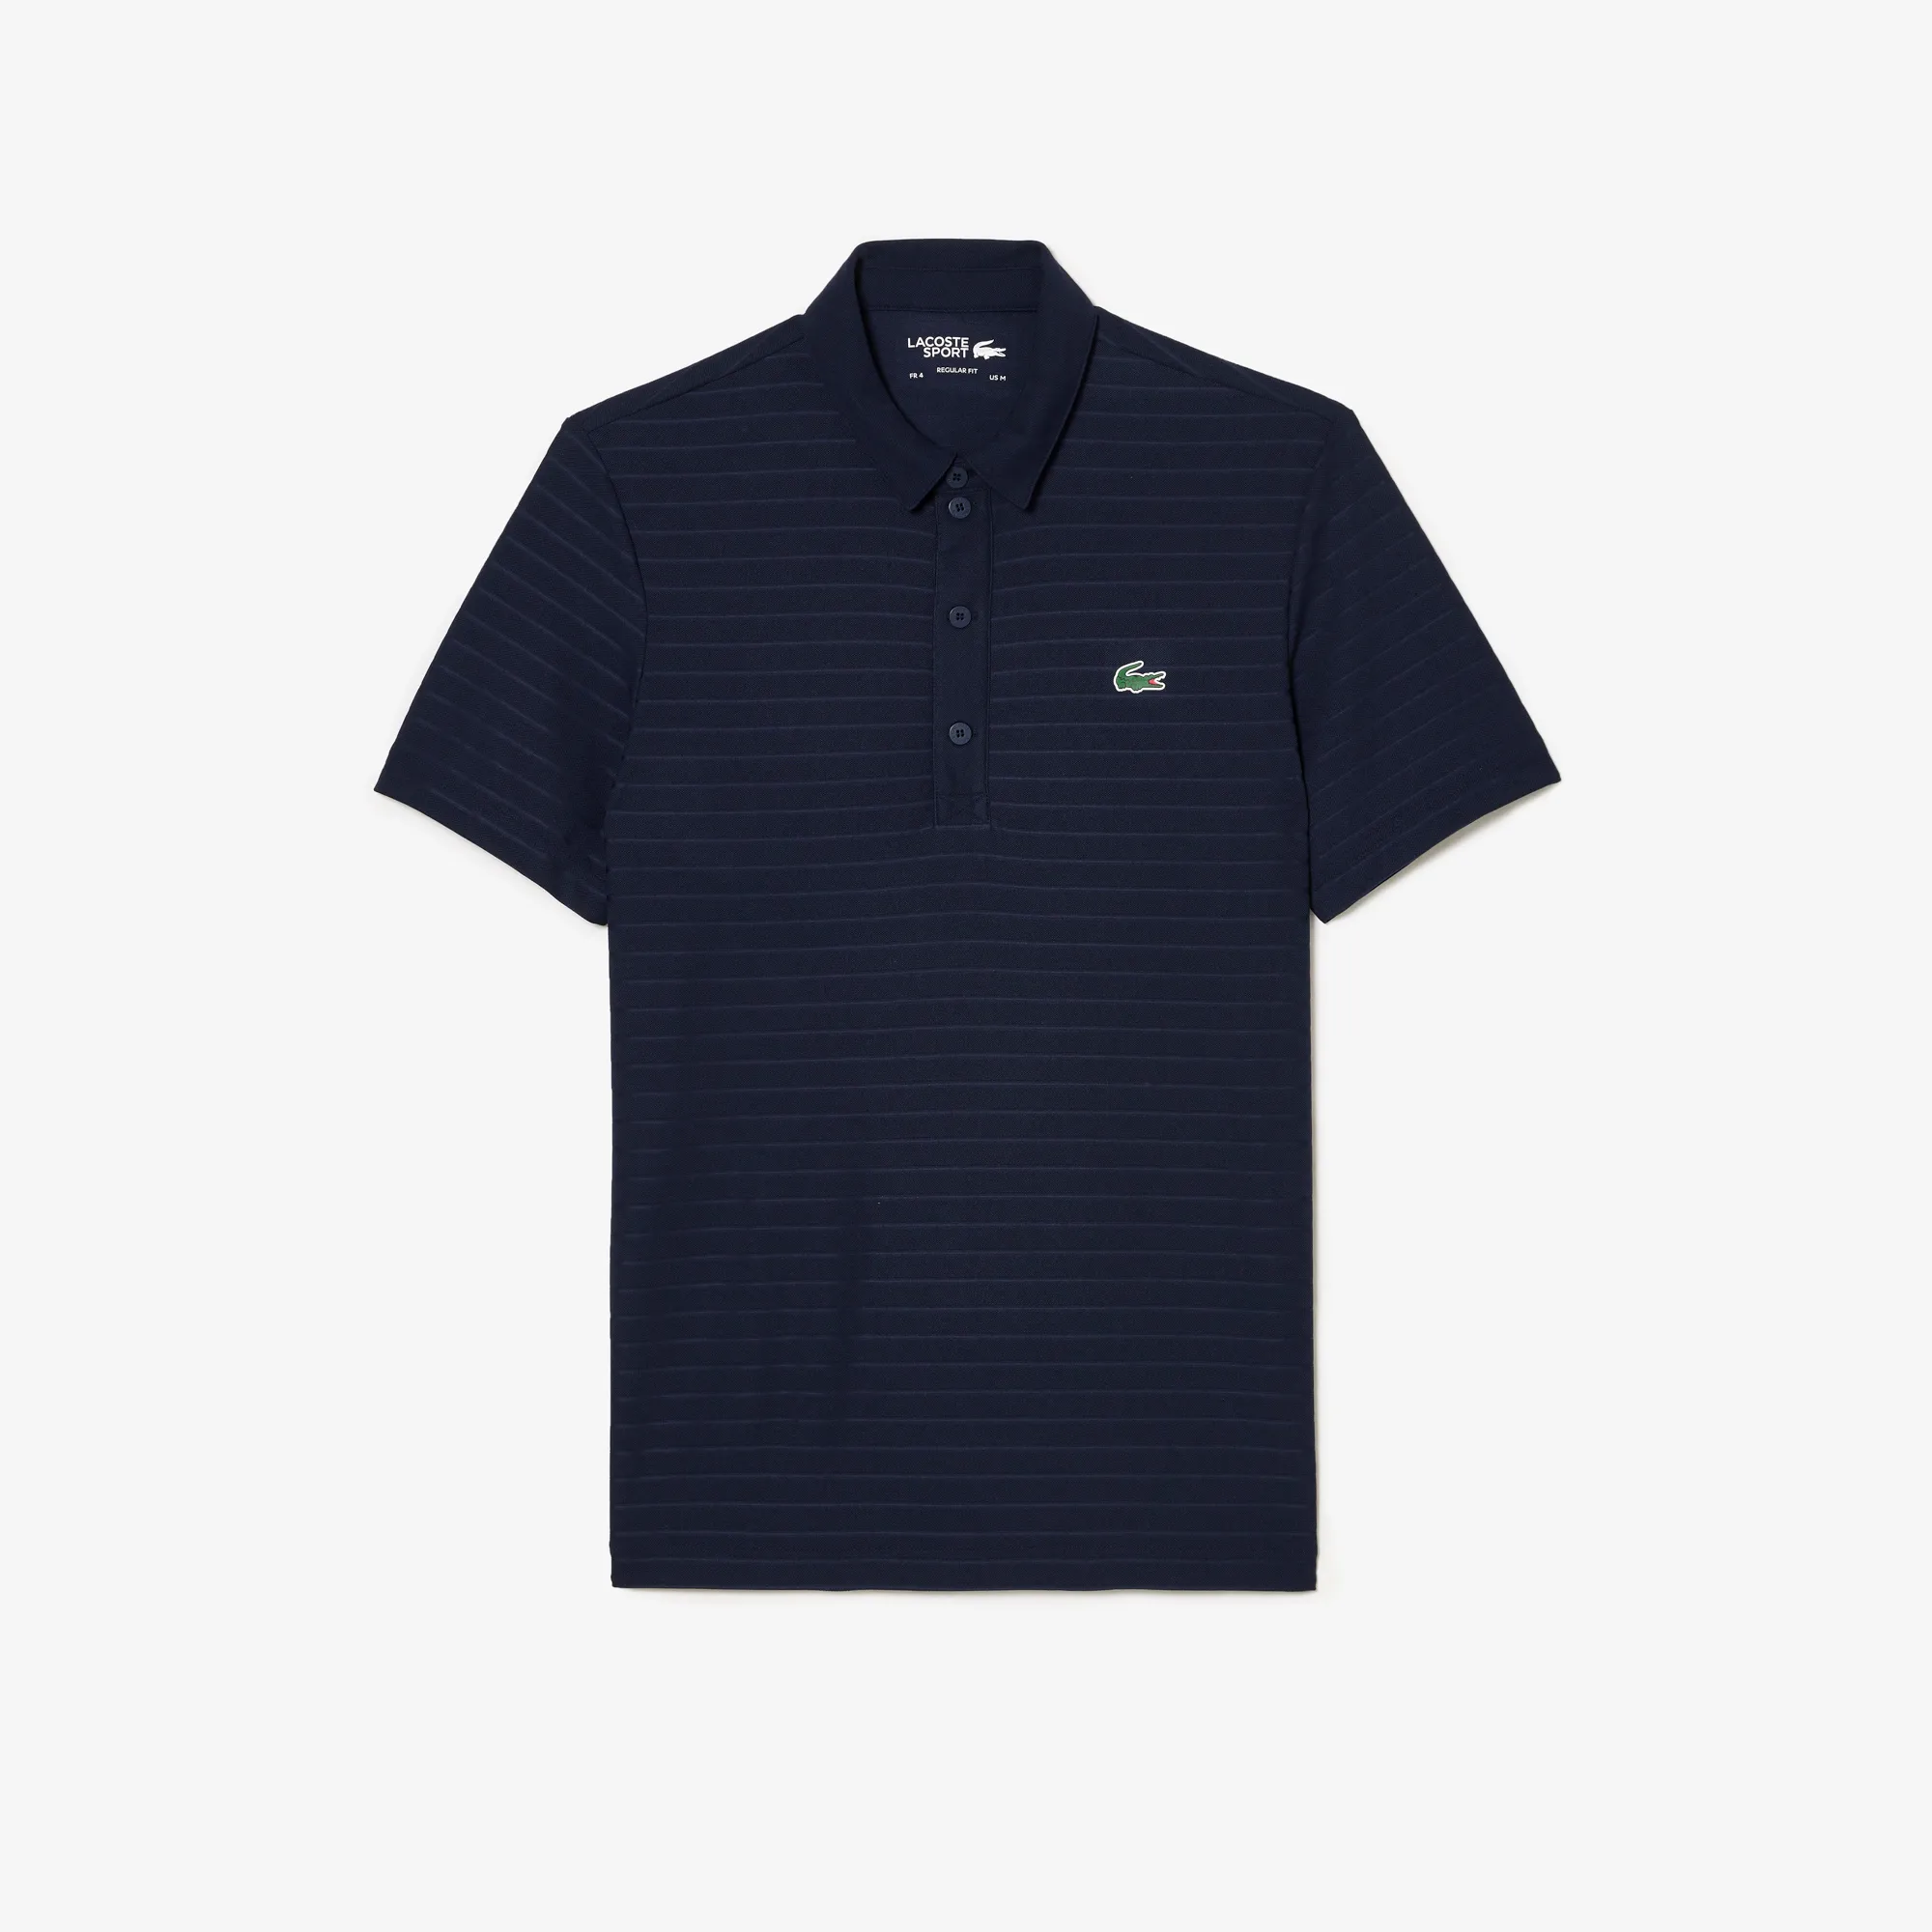 Men’s Lacoste SPORT Textured Breathable Golf Polo Shirt